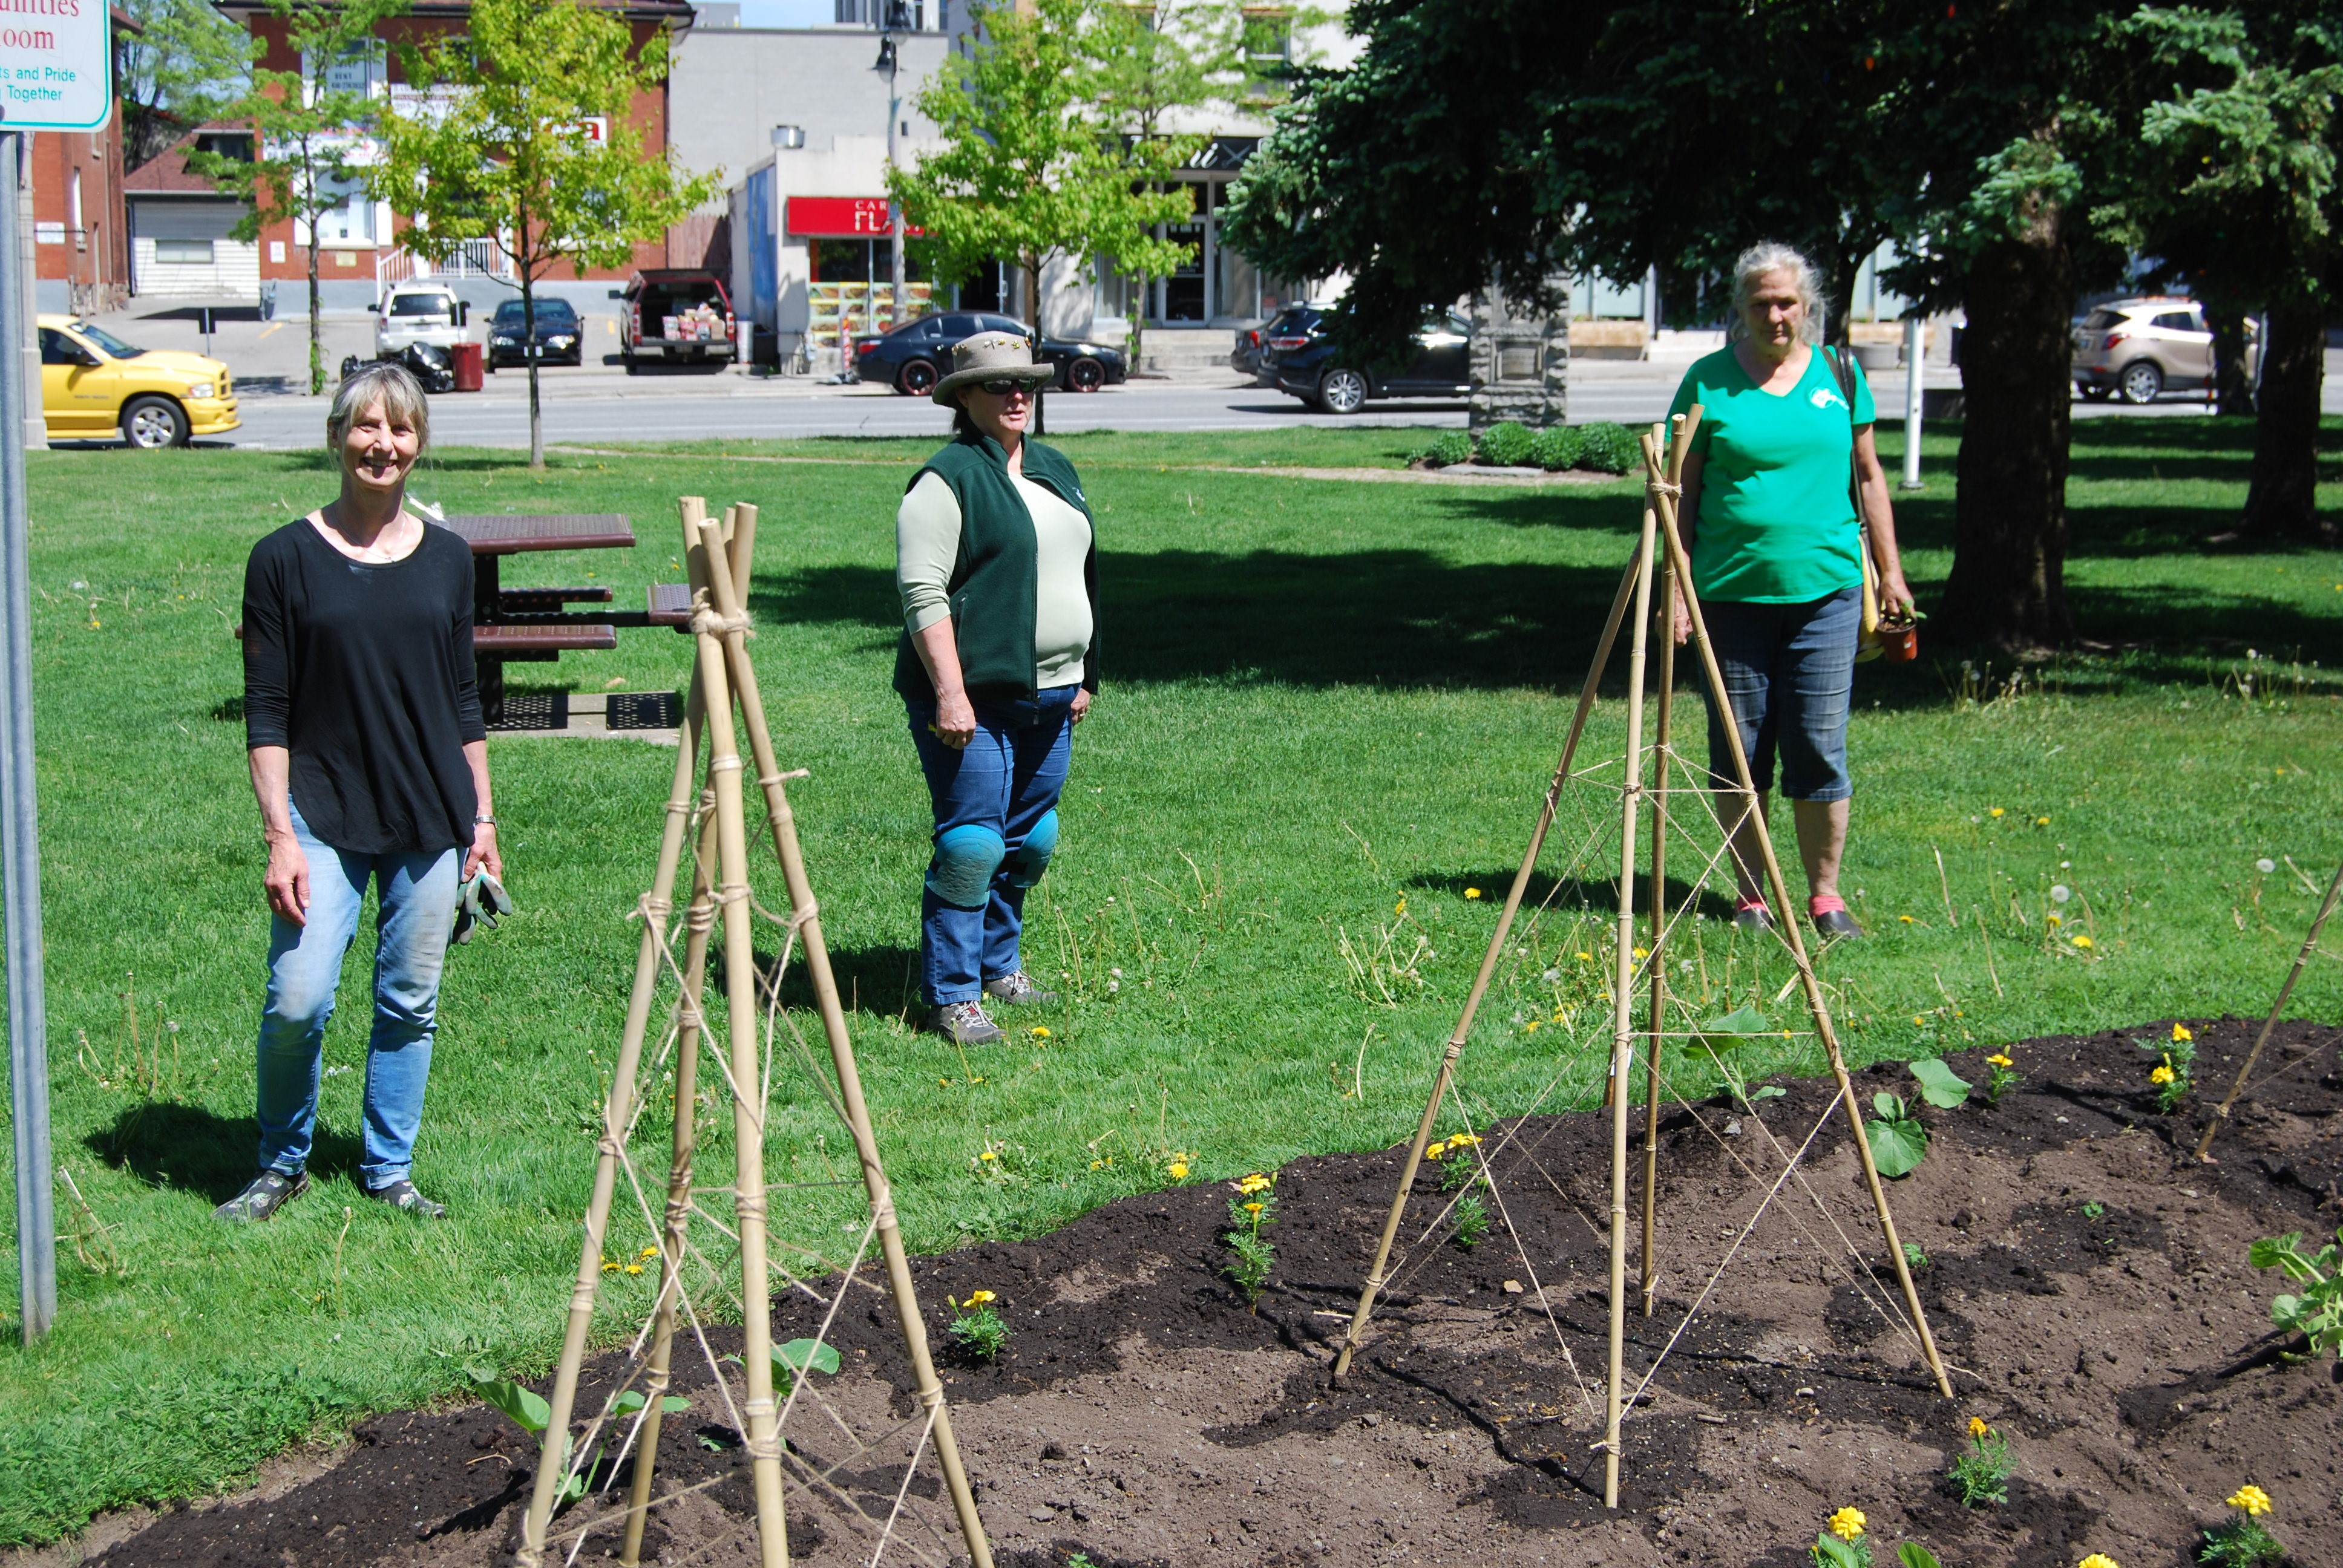 Volunteers at one of the City Hall gardens